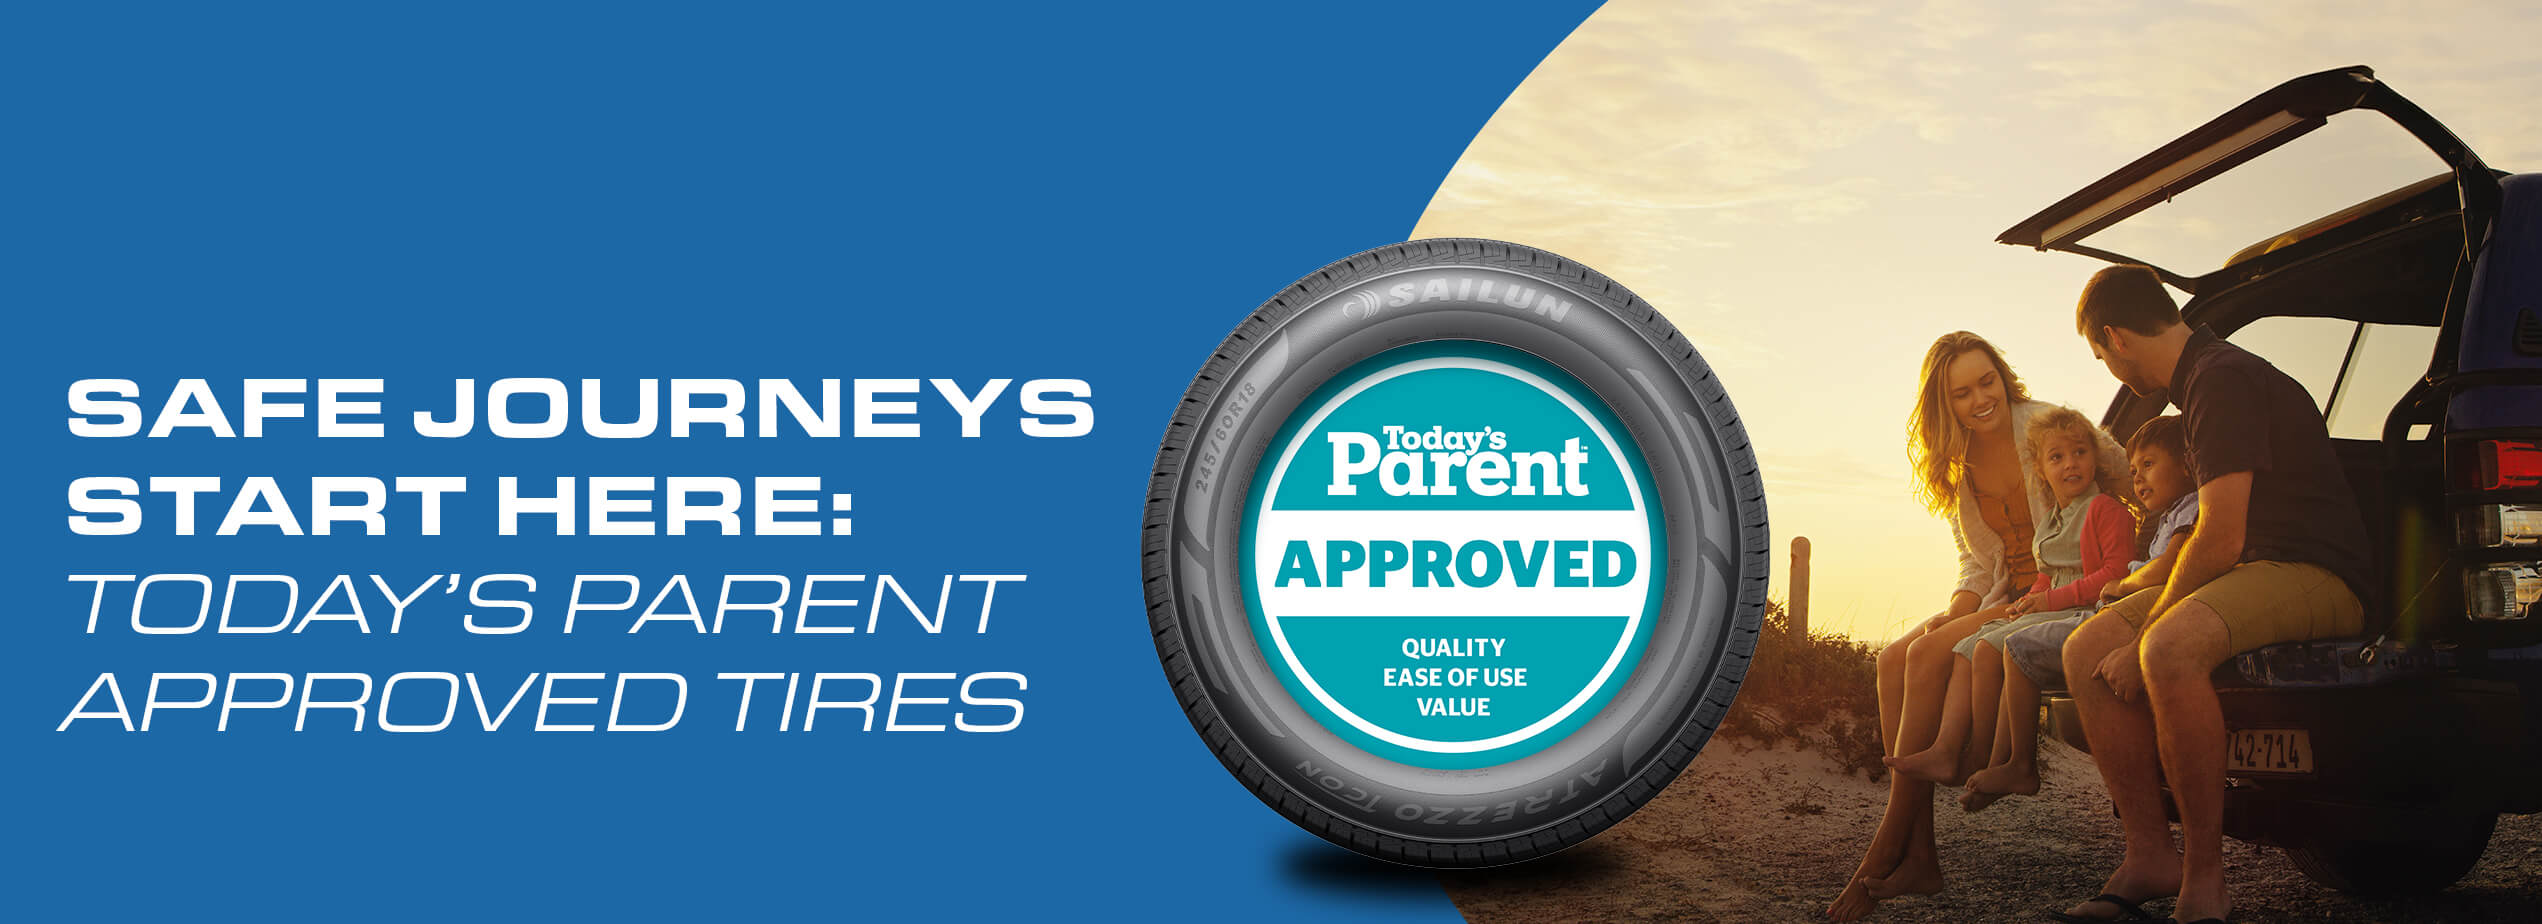 SAFE JOURNEY'S START HERE: TODAY'S PARENT APPROVED TIRES